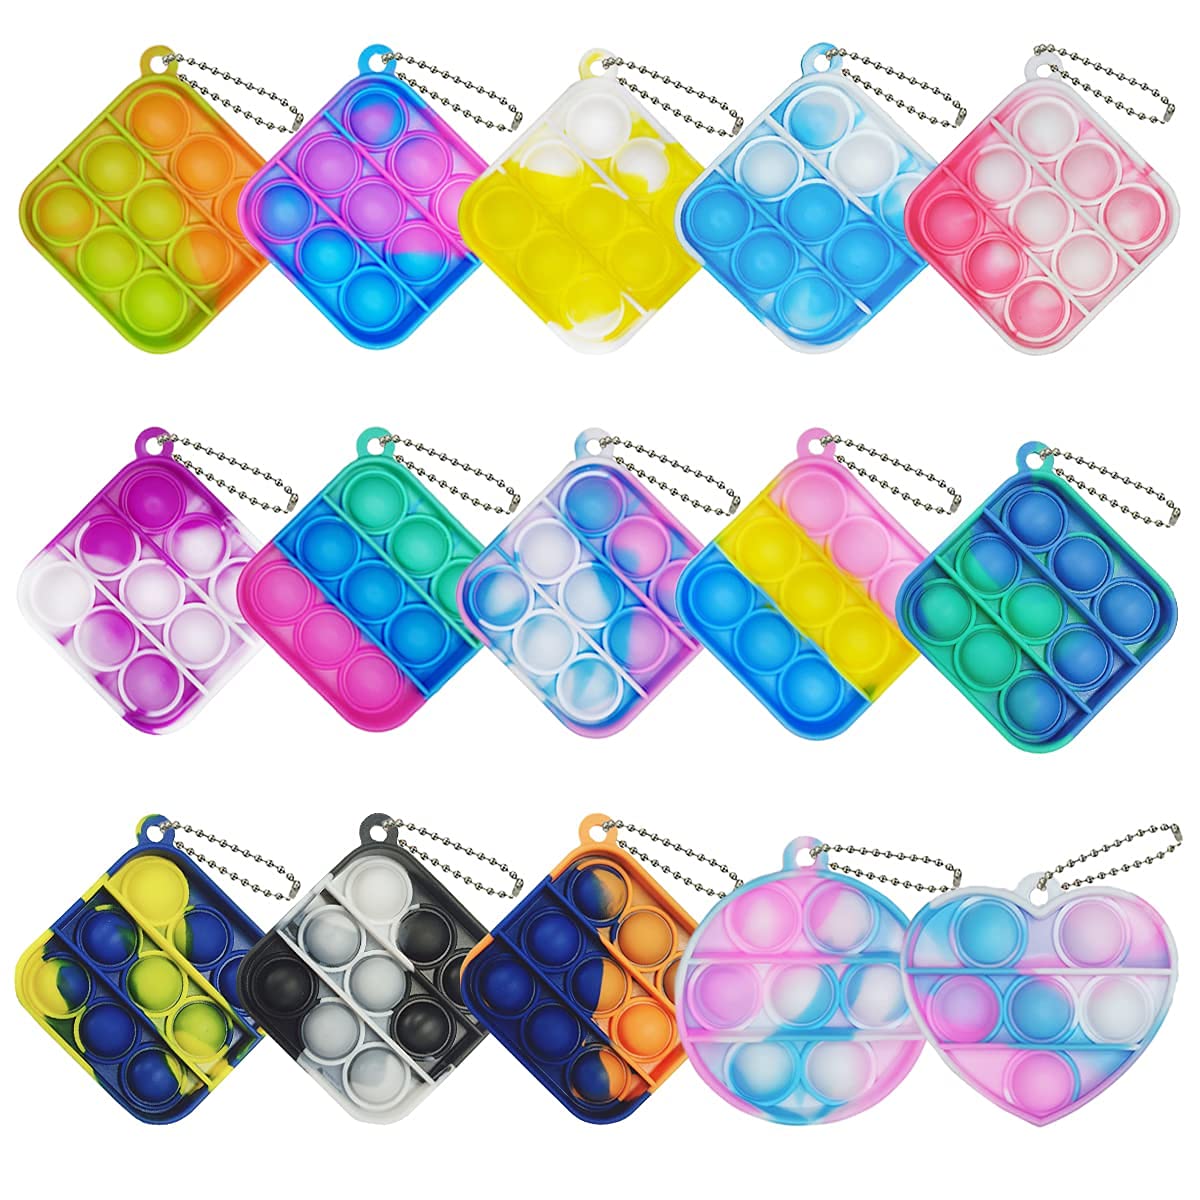 15 Pcs Mini Squeeze Pop Bubble Simple Fidget Sensory Toys, Mini Silicone Keychain Wrap Small Pop Bulk Classroom Prizes Relieve Anxiety Stress Toy for Kids Adult Party Favors